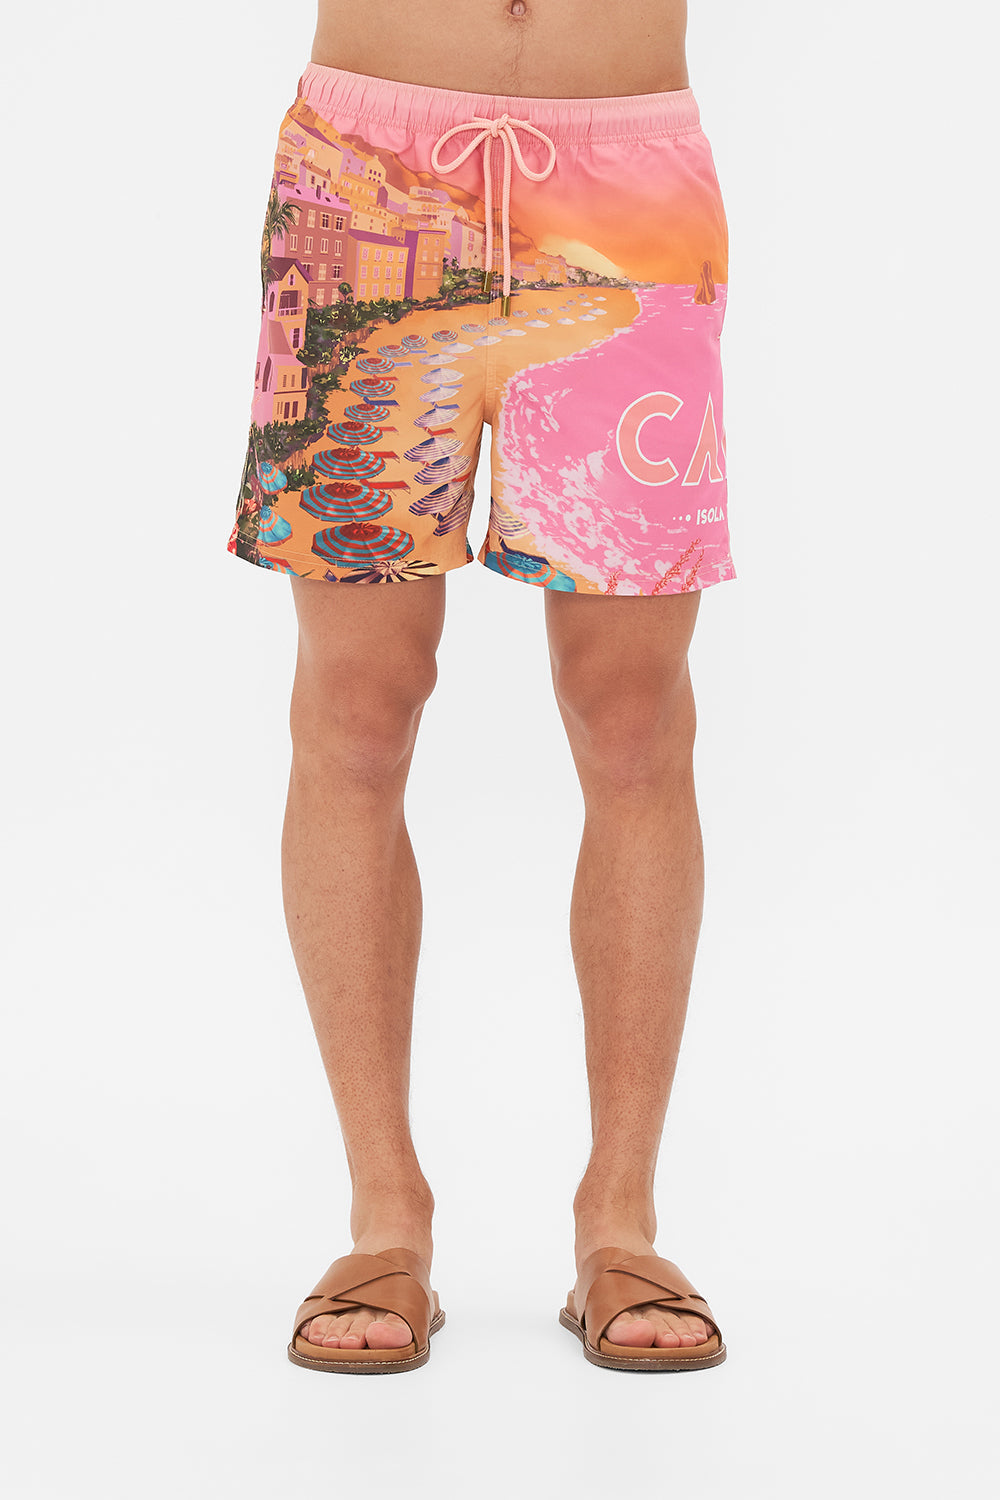 Crop view of model wearing Hotel Franks By CAMILLA mens boardshorts in Capri Me print